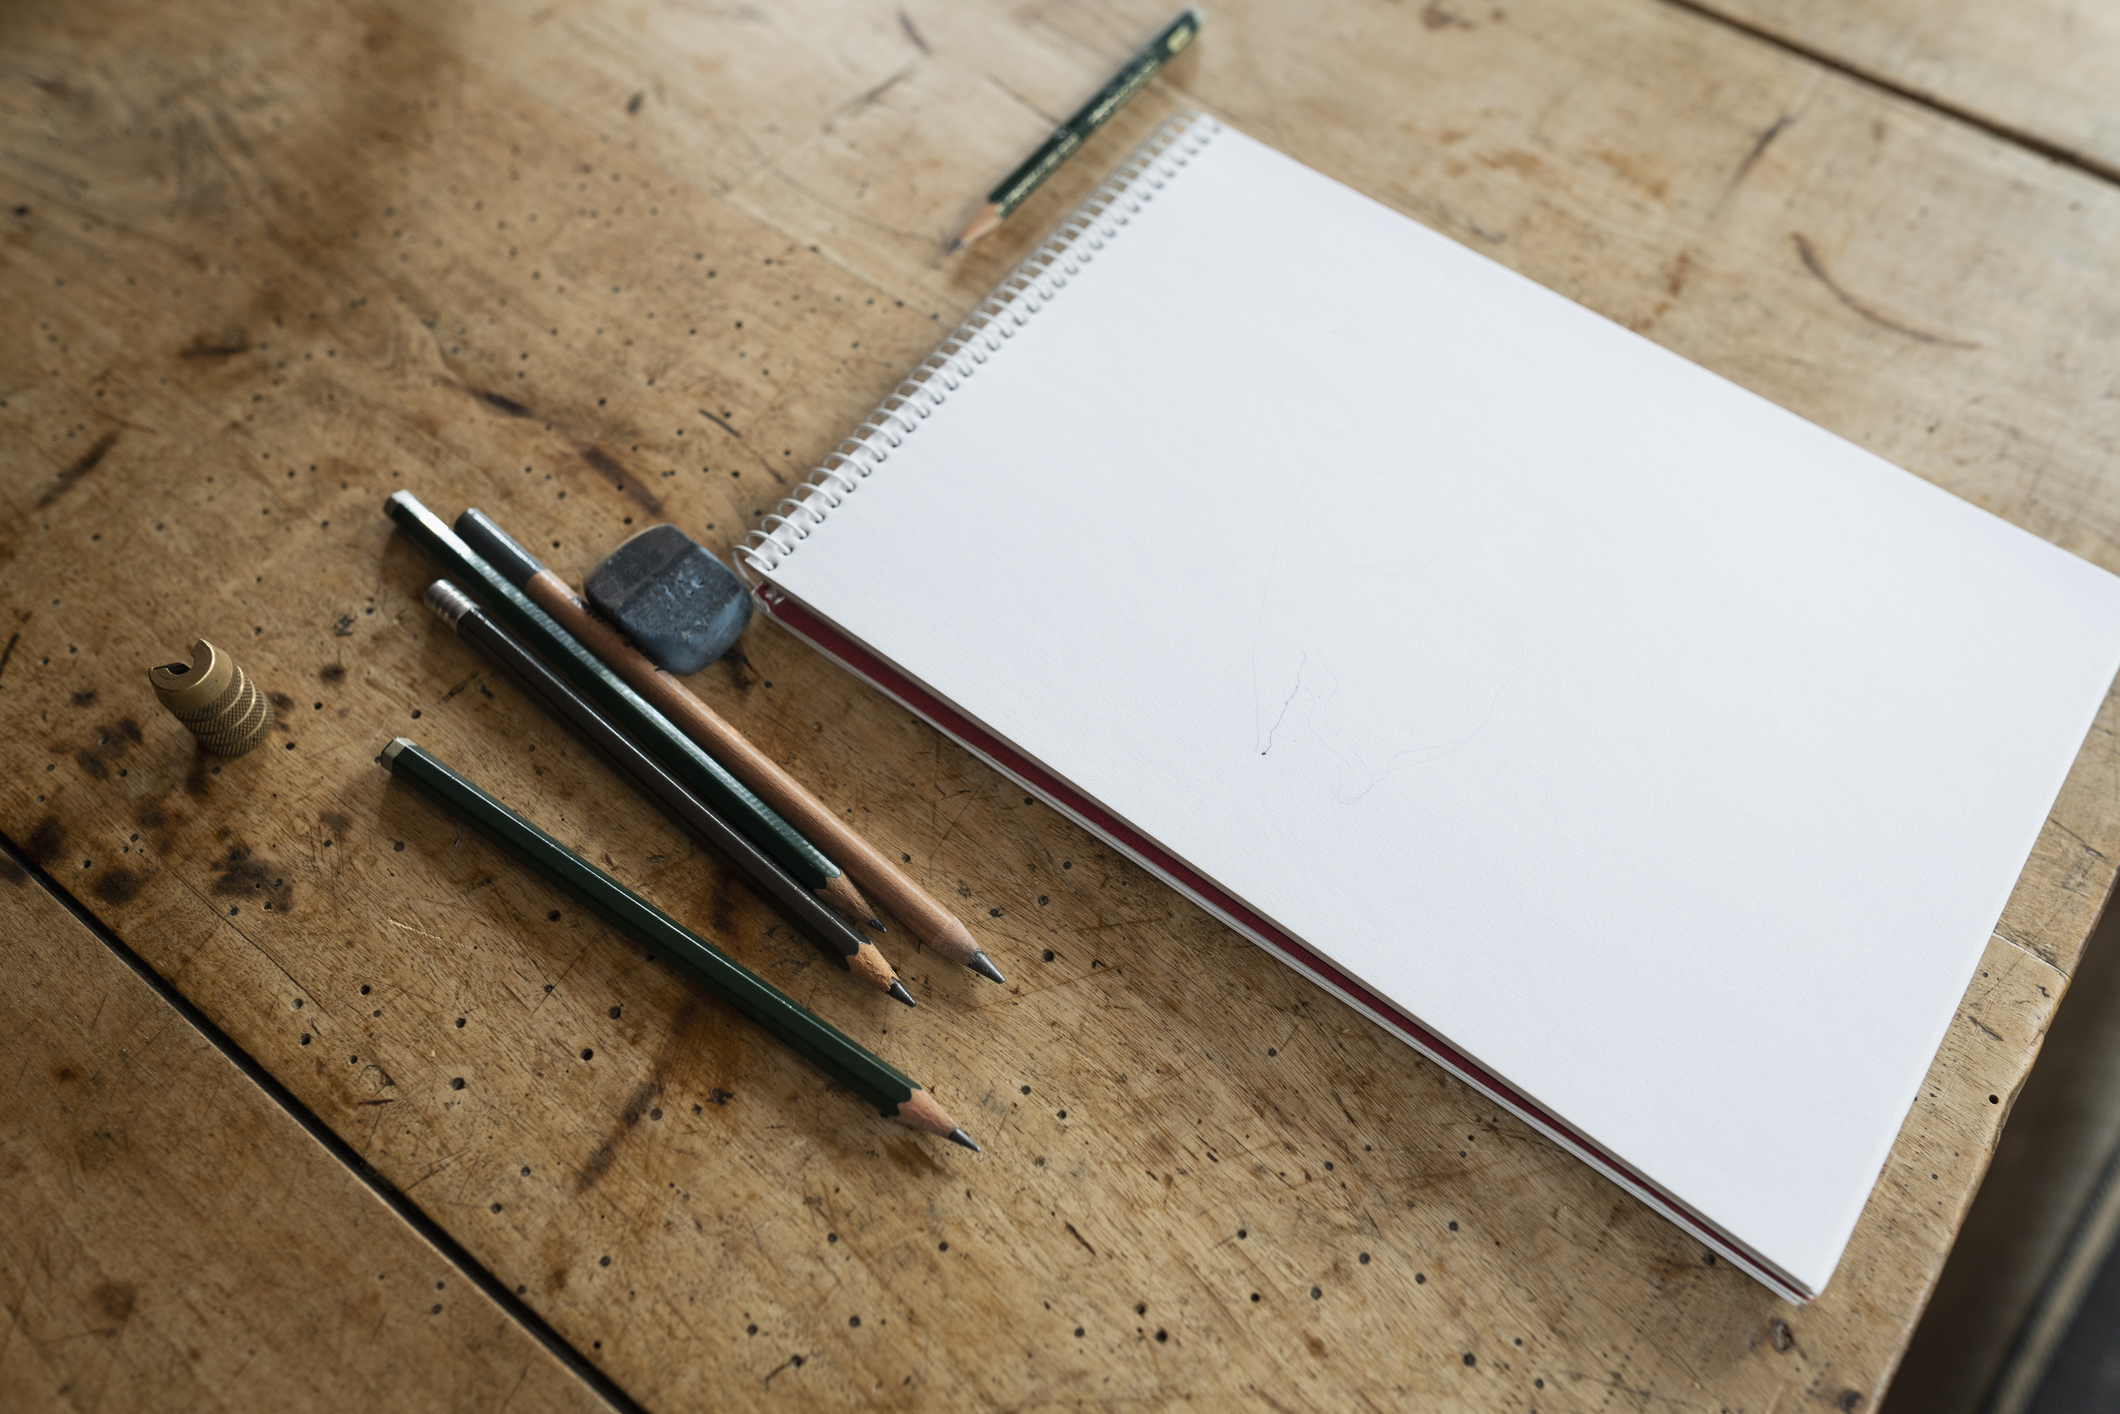 A sketchbook with blank pages next to pencils and an eraser on a wooden surface